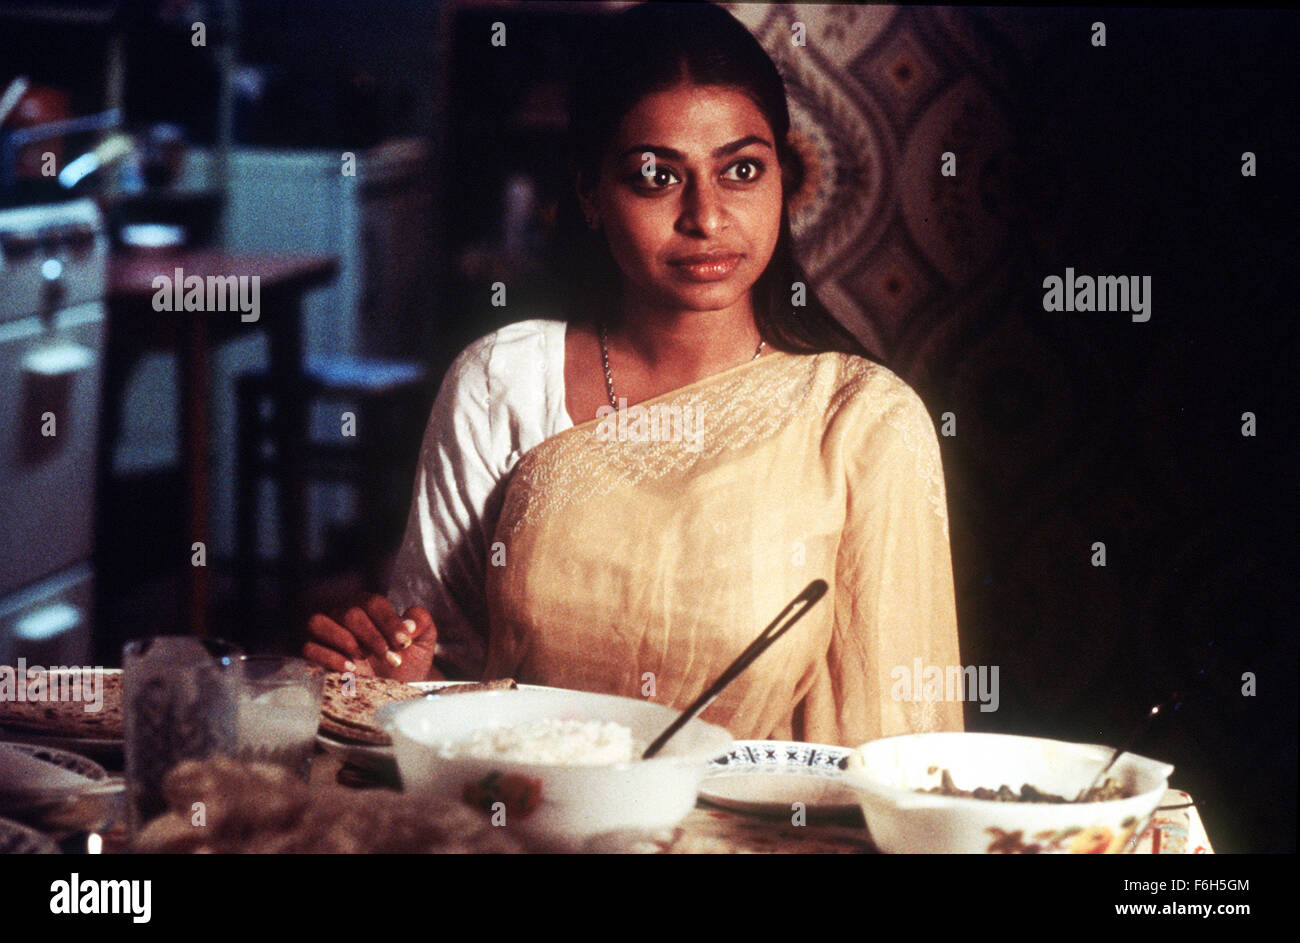 May 06, 2002; London, UK; Actress AYESHA DHARKER stars as Mrs. Kumar in the comedy/ drama 'Anita and Me' directed by Metin Huseyin. Meena, a 12 year old living in a mining village in the English Midlands in 1972, is the daughter of Indian parents who've coem to England to give her a better life. This idyllic existence is upset by the arrival in the village of Anita Rutter and her dysfunctional family. Stock Photo